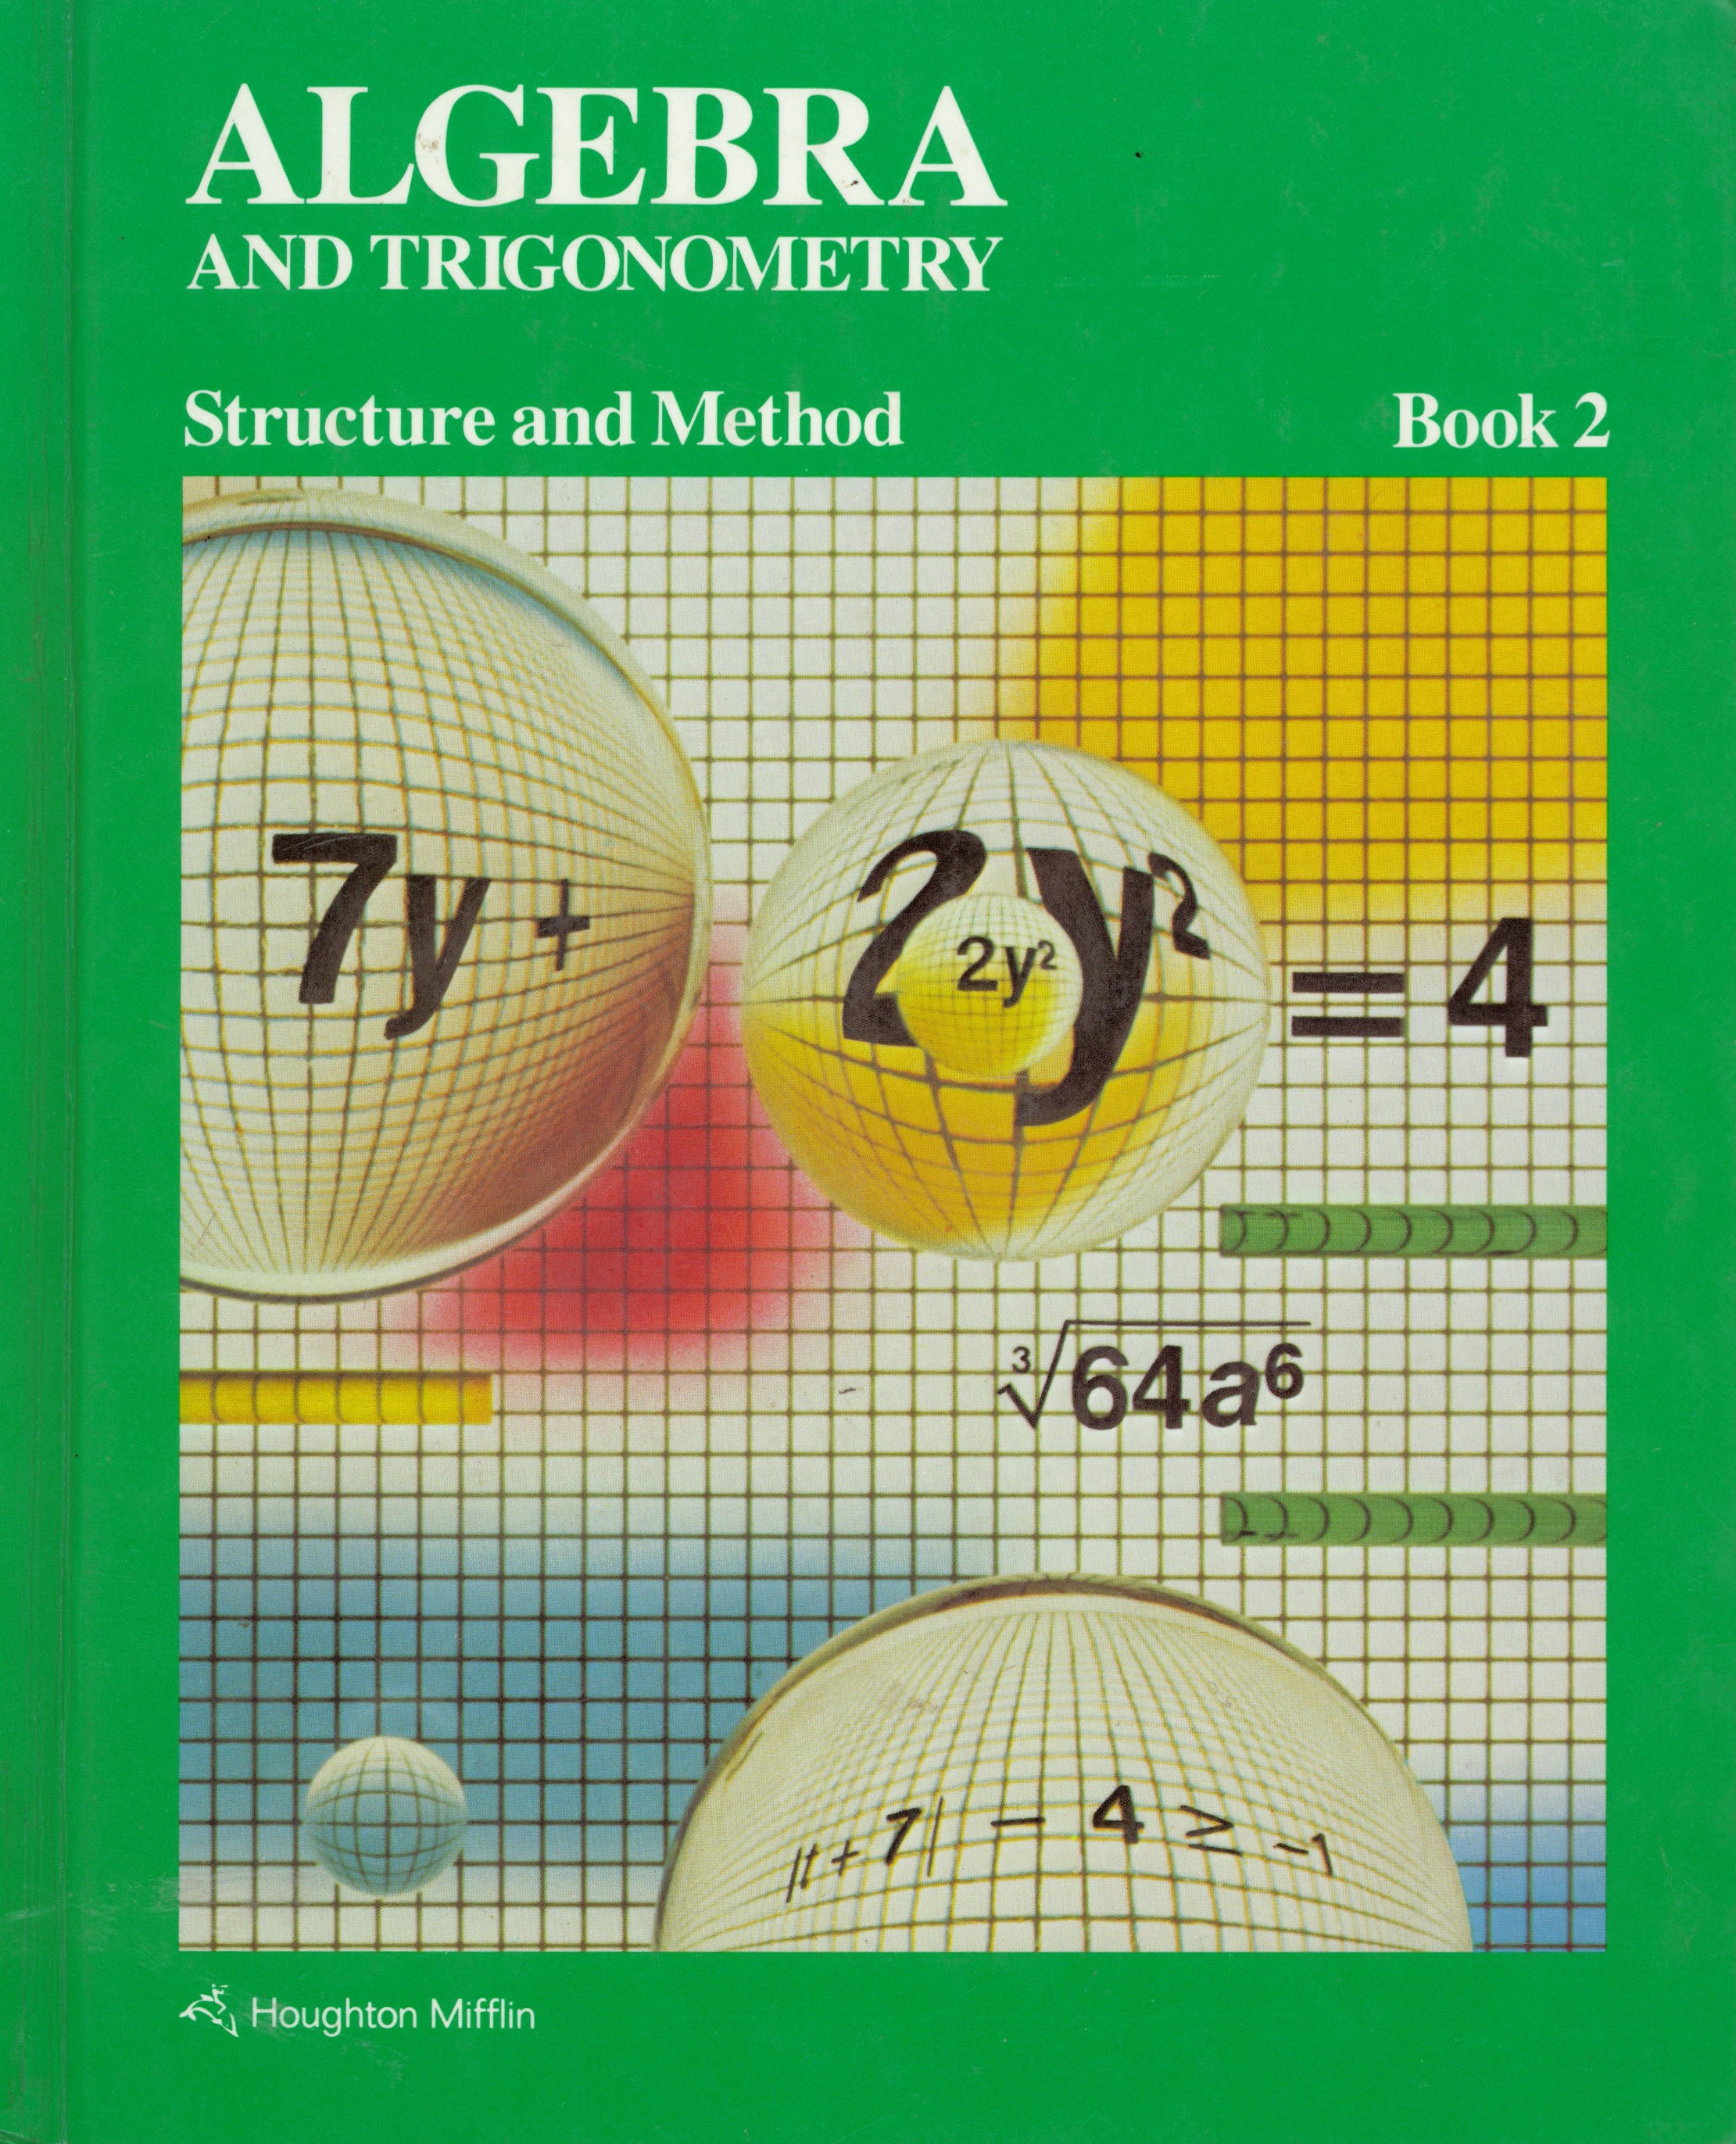 Algebra and trigonometry : structure and method, book 2